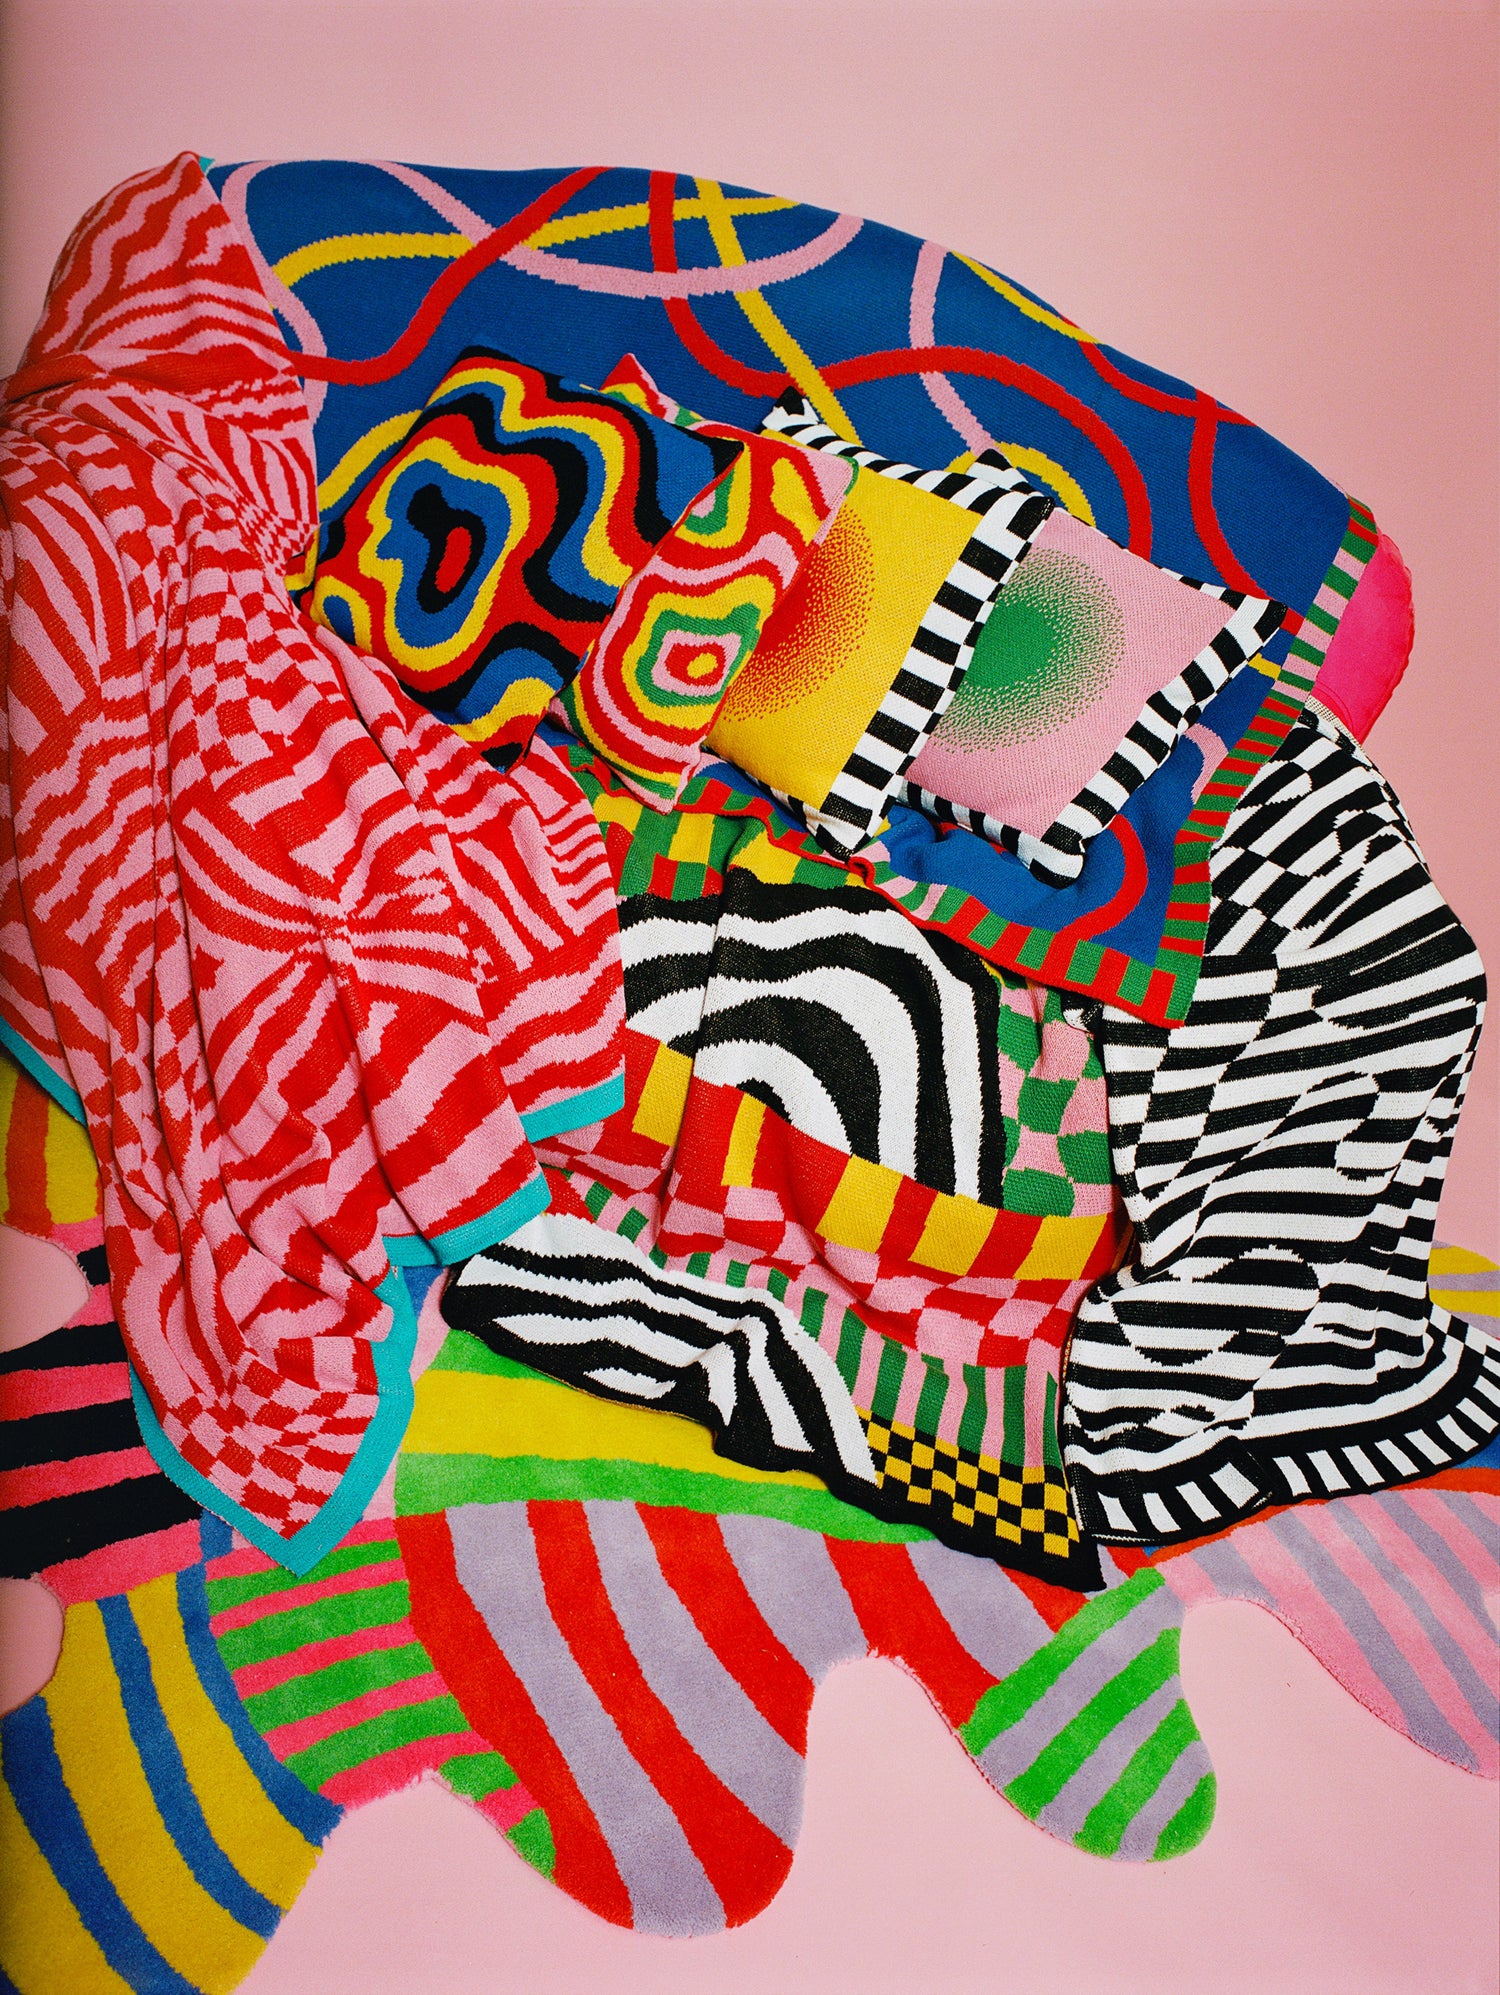 Detail image showing pile of many pillows and blankets on top of the Squiggle Stripe Rug.